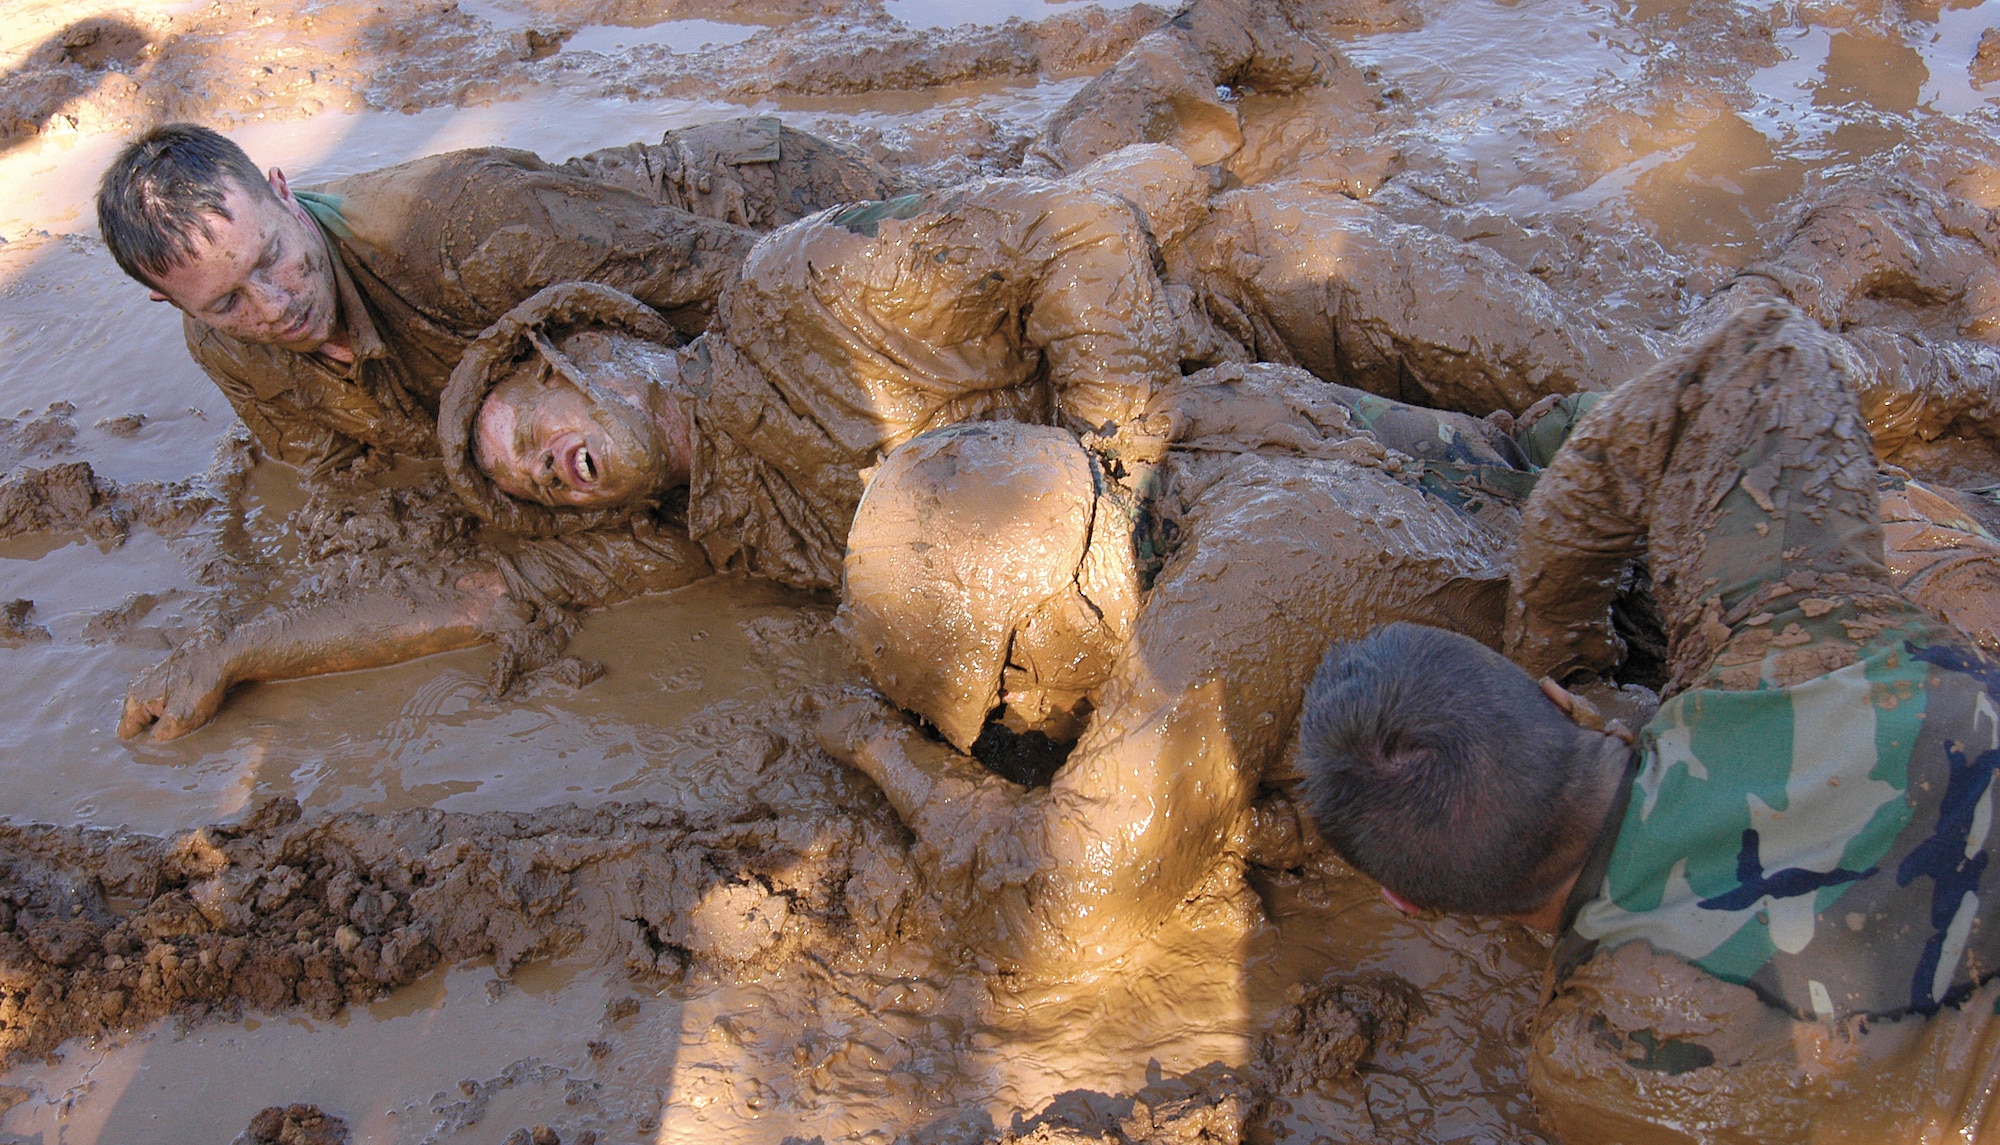 Airmen strain to move inches through mud, perfecting low- and high-crawl techniques during week one of the Combat Readiness School at Tinker AFB, Okla.  Instructors drill into students the motto of “no one left behind” and watch the concept take hold as Airmen enter the pit as individuals, but struggle to the end as a team, encouraging and pulling each other to the finish. Fire team members from left are; Staff Sgt. Rich Brumbaugh, 349th Communications Squadron, Travis AFB, Calif; Staff Sgt. Christopher Kelley, 33rd Combat Communications Squadron, Tinker; Senior Airman Raid Alawar, 349th CS; and Airman Micheal Garner, 31st CCS, Tinker. (Air Force photo by Margo Wright)   